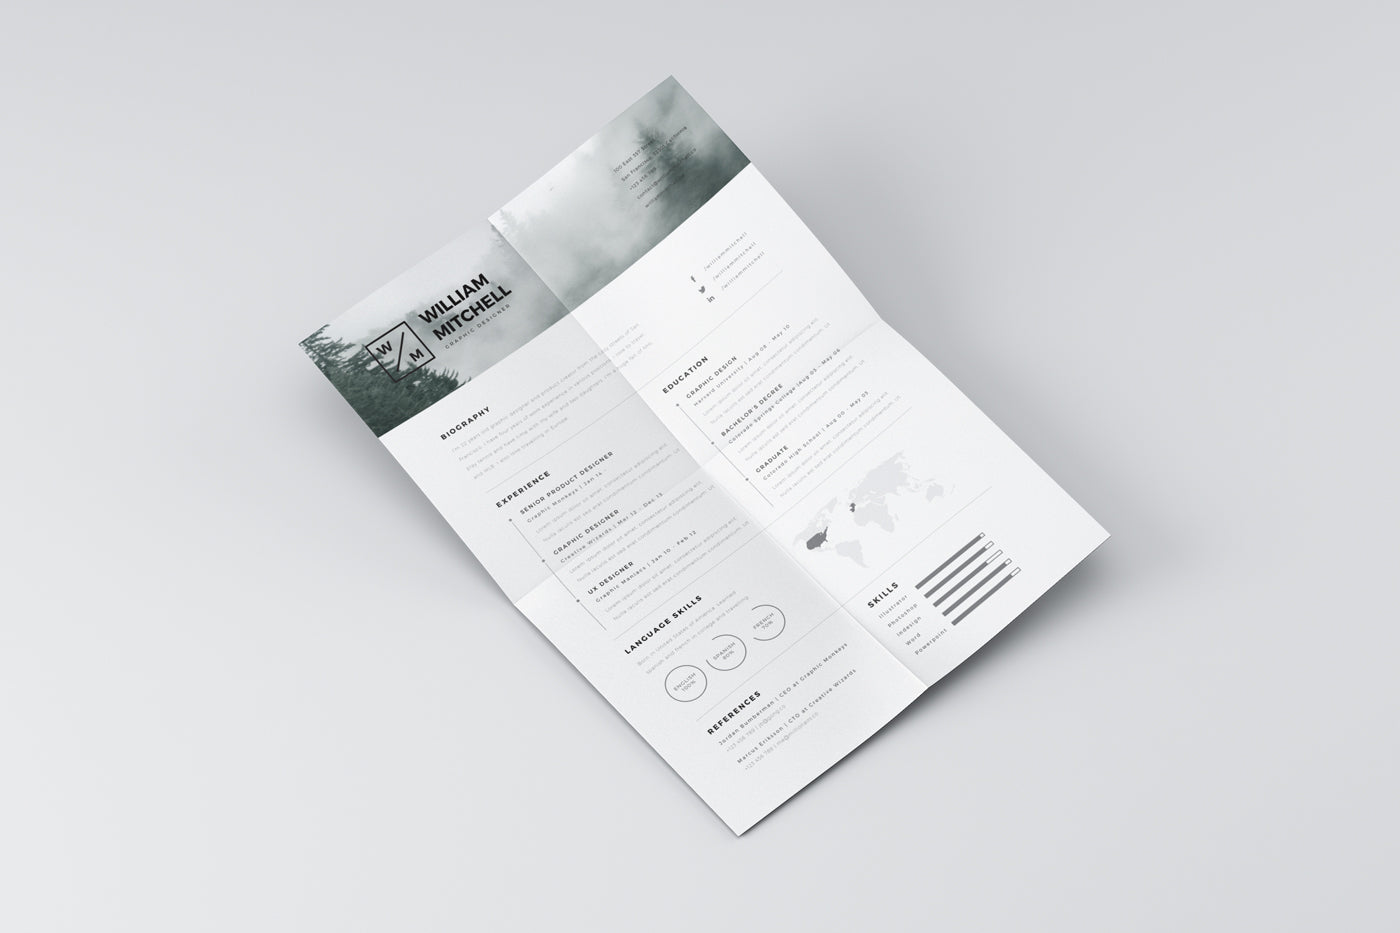 Free Minimalistic and Clean Resume Template in Photoshop (PSD) and Illustrator (AI) Formats